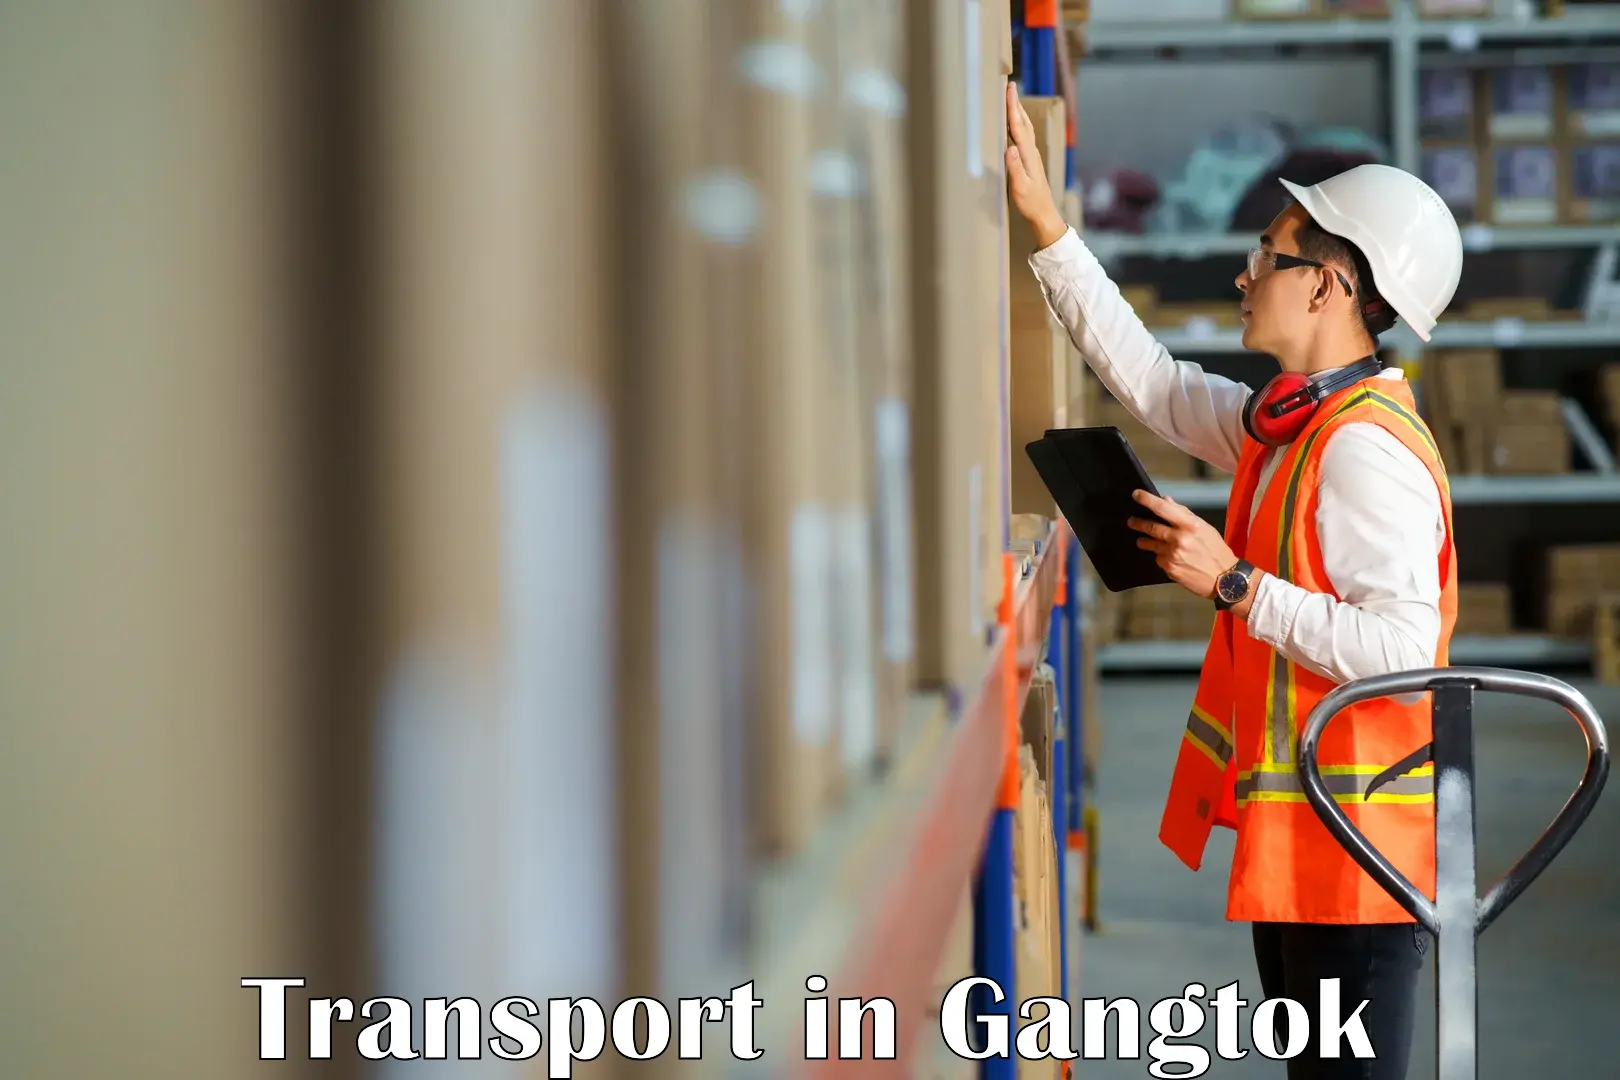 Daily parcel service transport in Gangtok